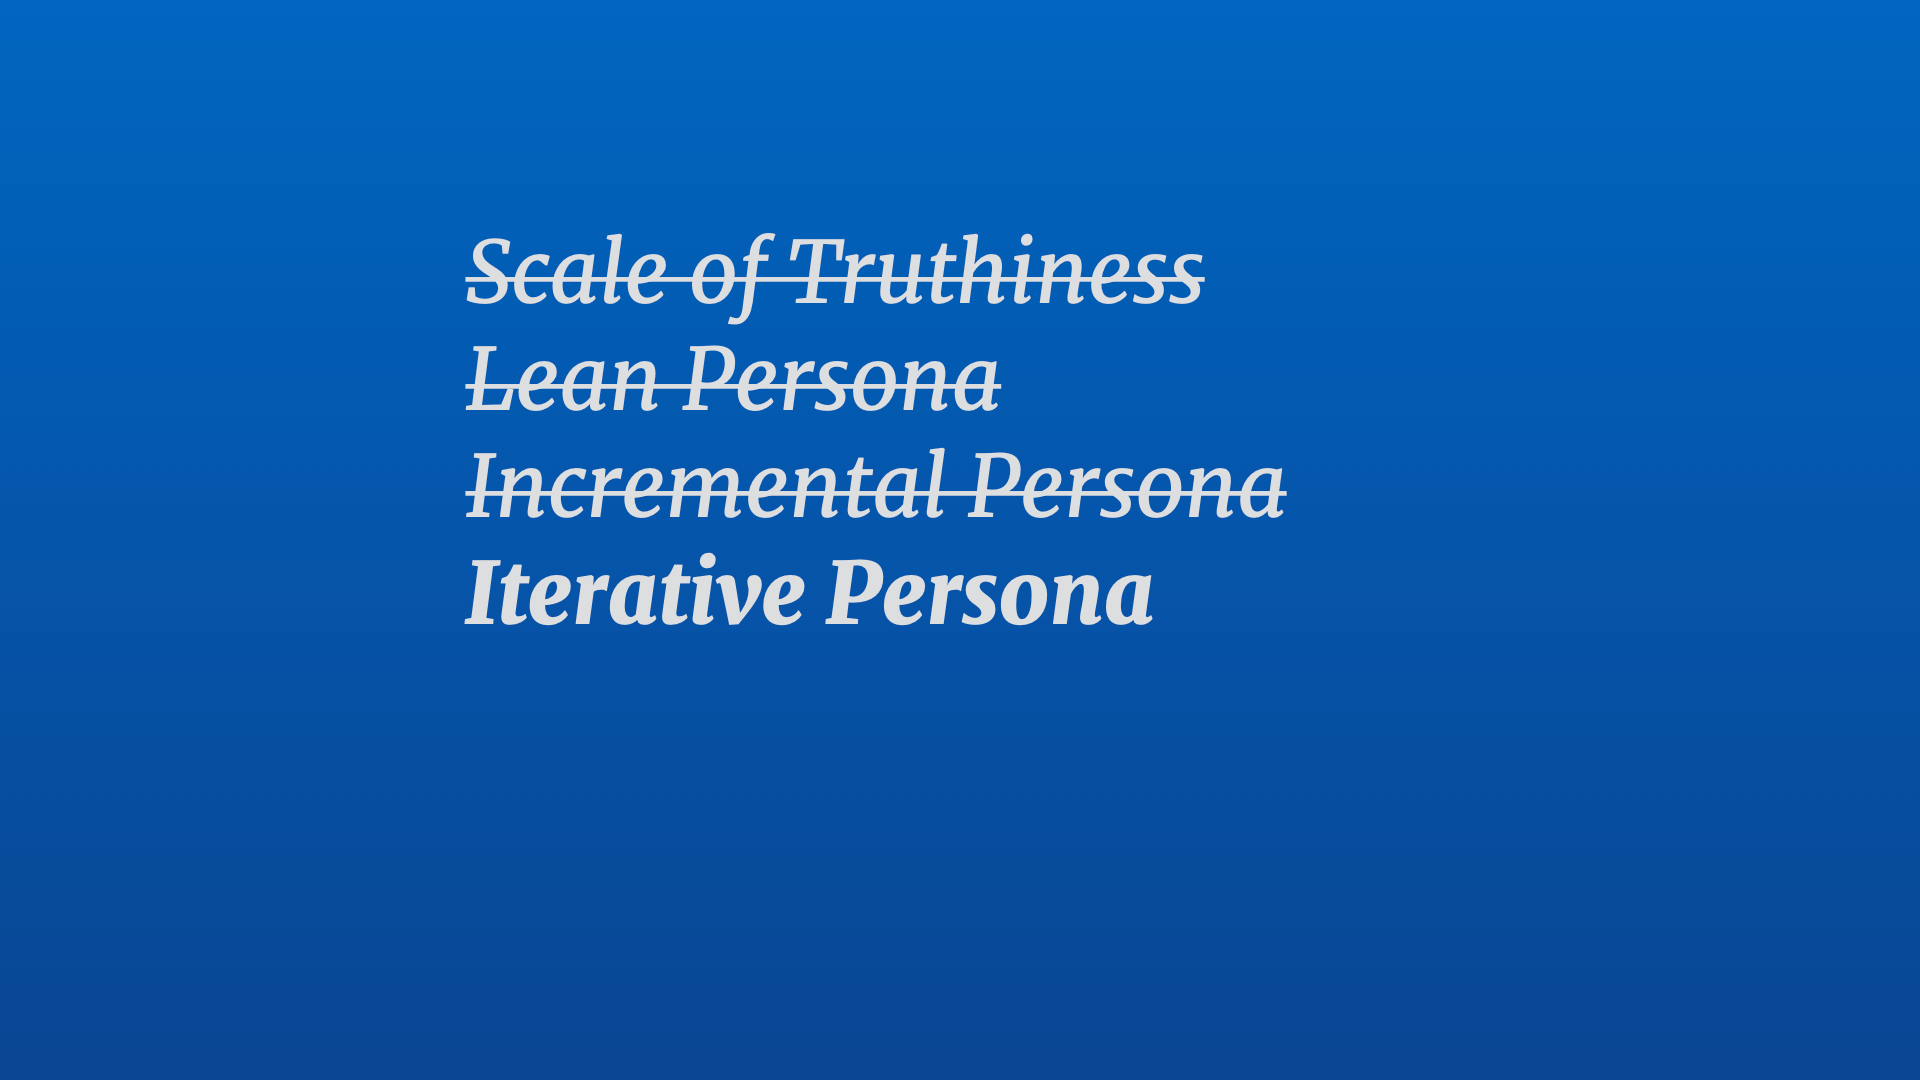 Text title: Iterative Persona (underneath a list of old crossed out titles titles: 'Scale of Truthiness', 'Lean Persona', and 'Incremental Persona')